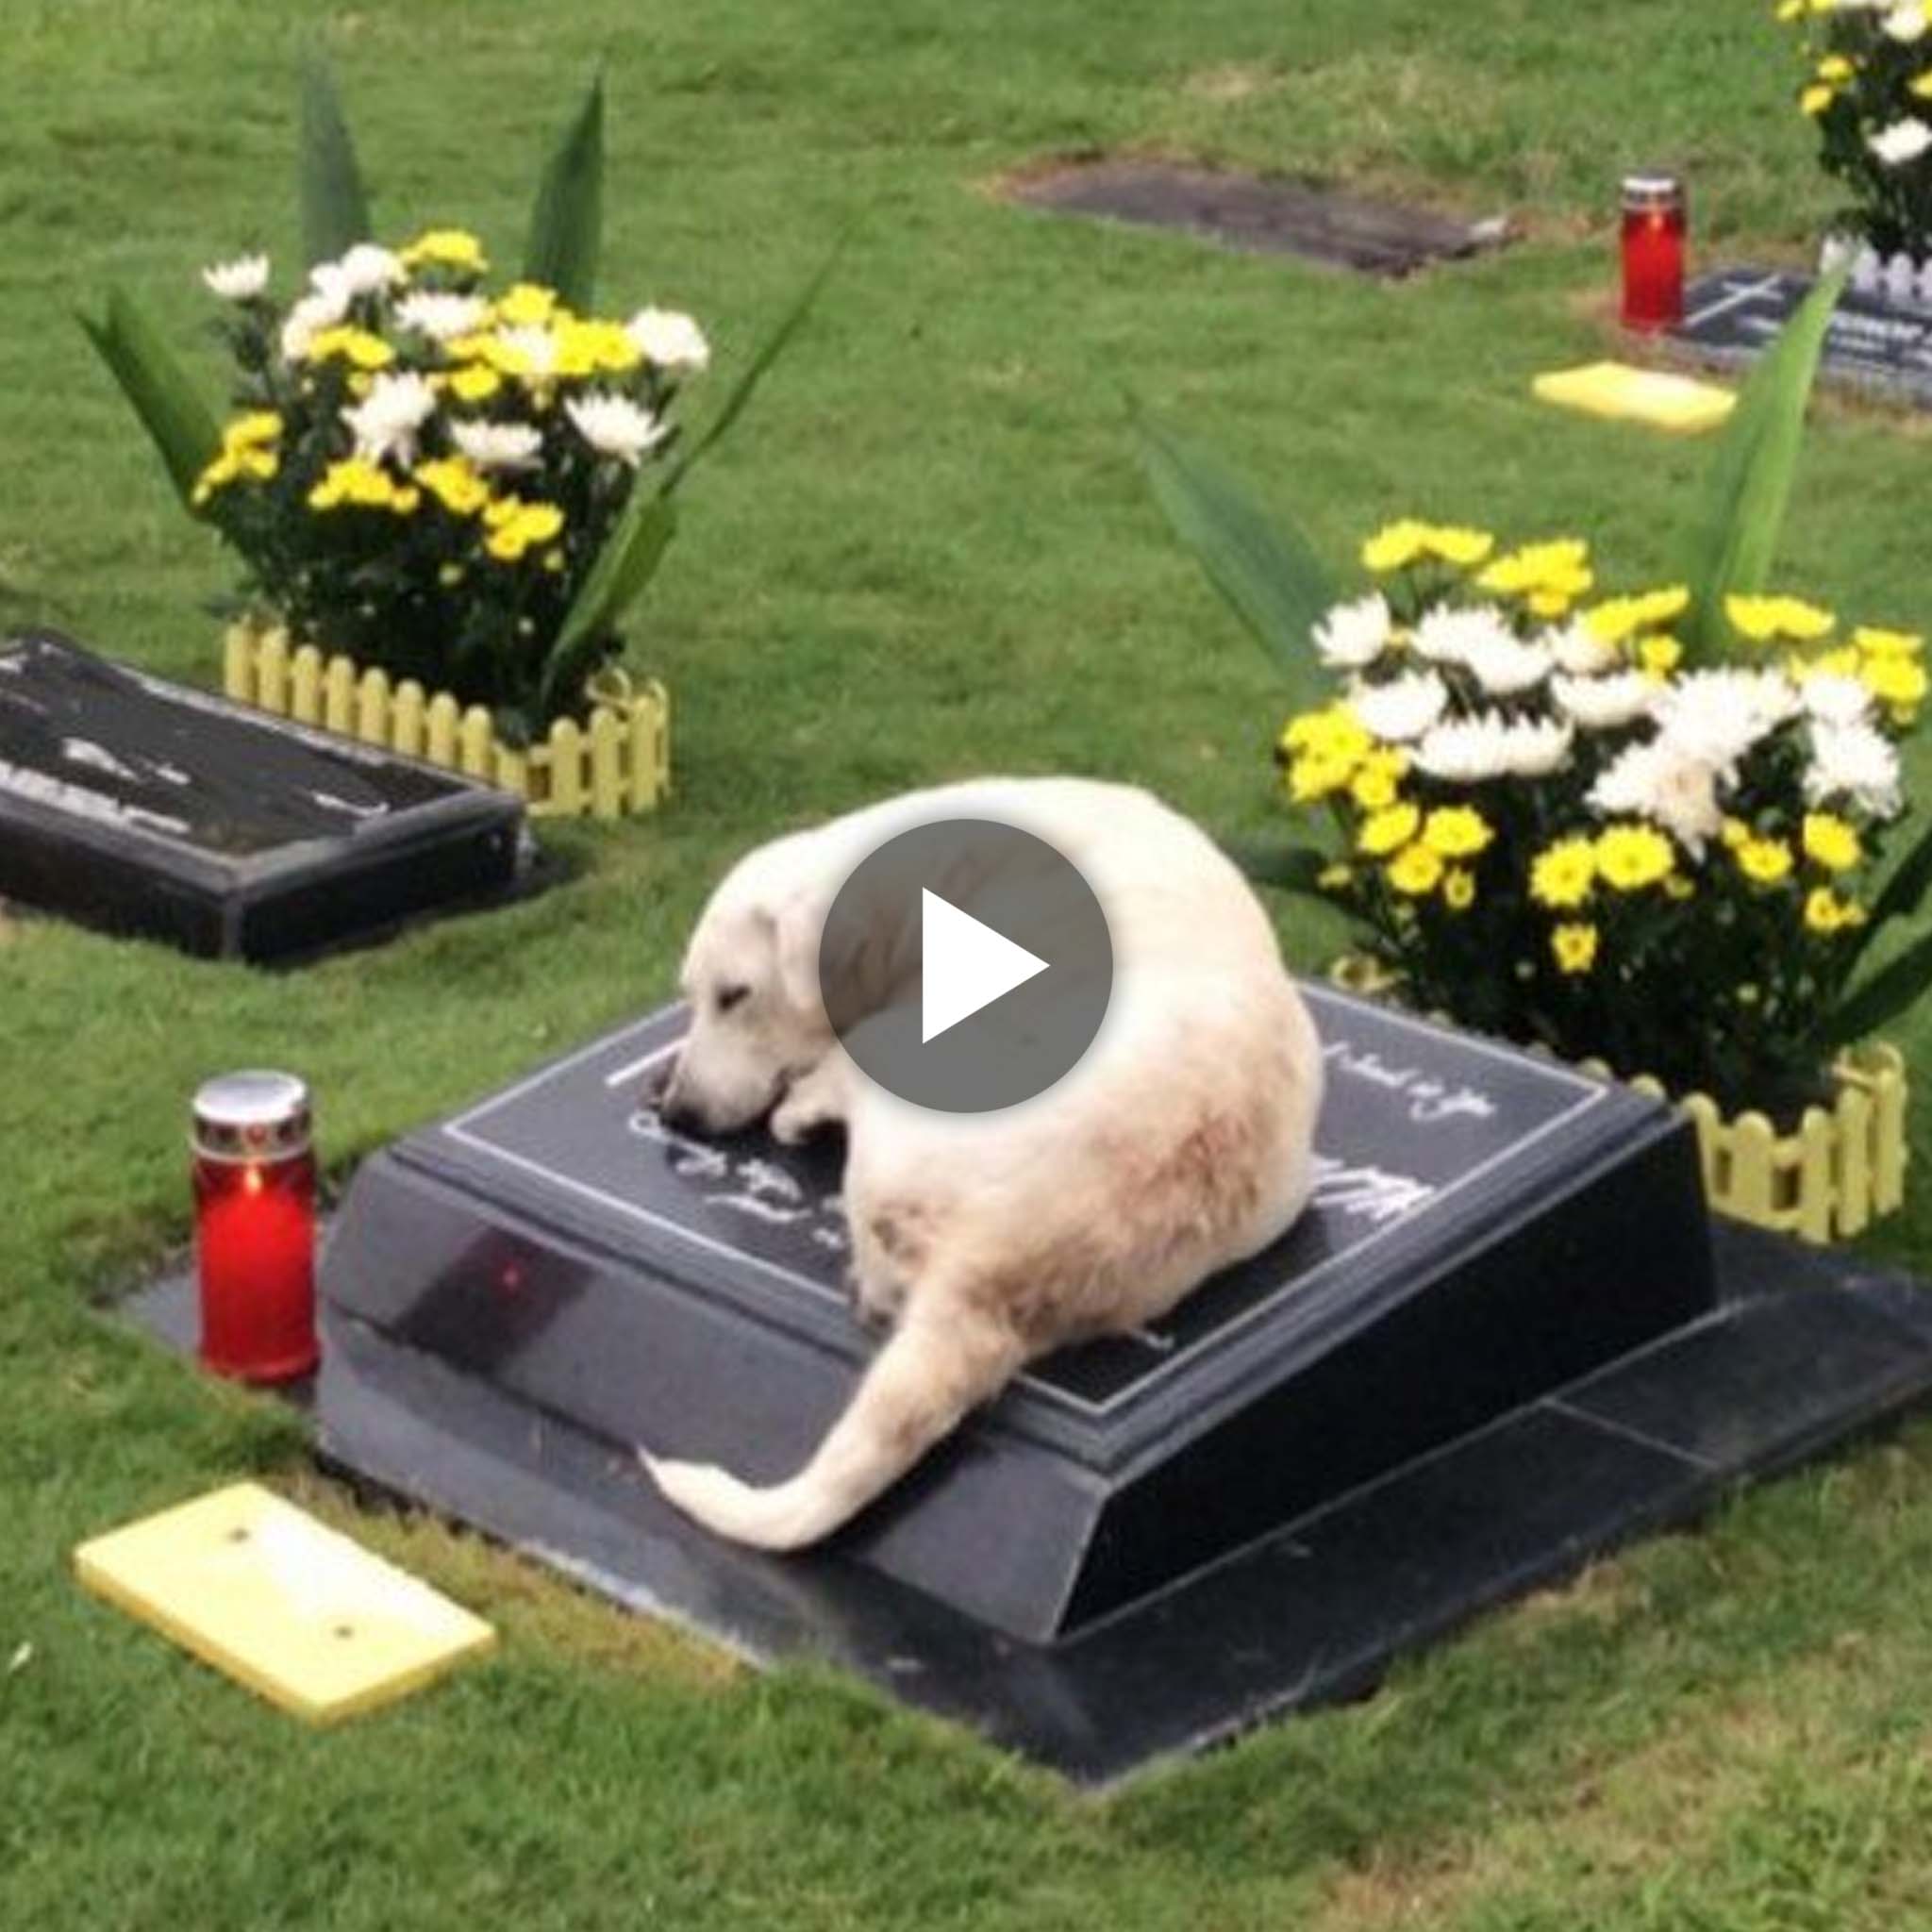 The loyal dog, who has heartbroken numerous witnesses, still makes the daily pilgrimage to his owner’s last resting place, longing for the carefree days of his youth.